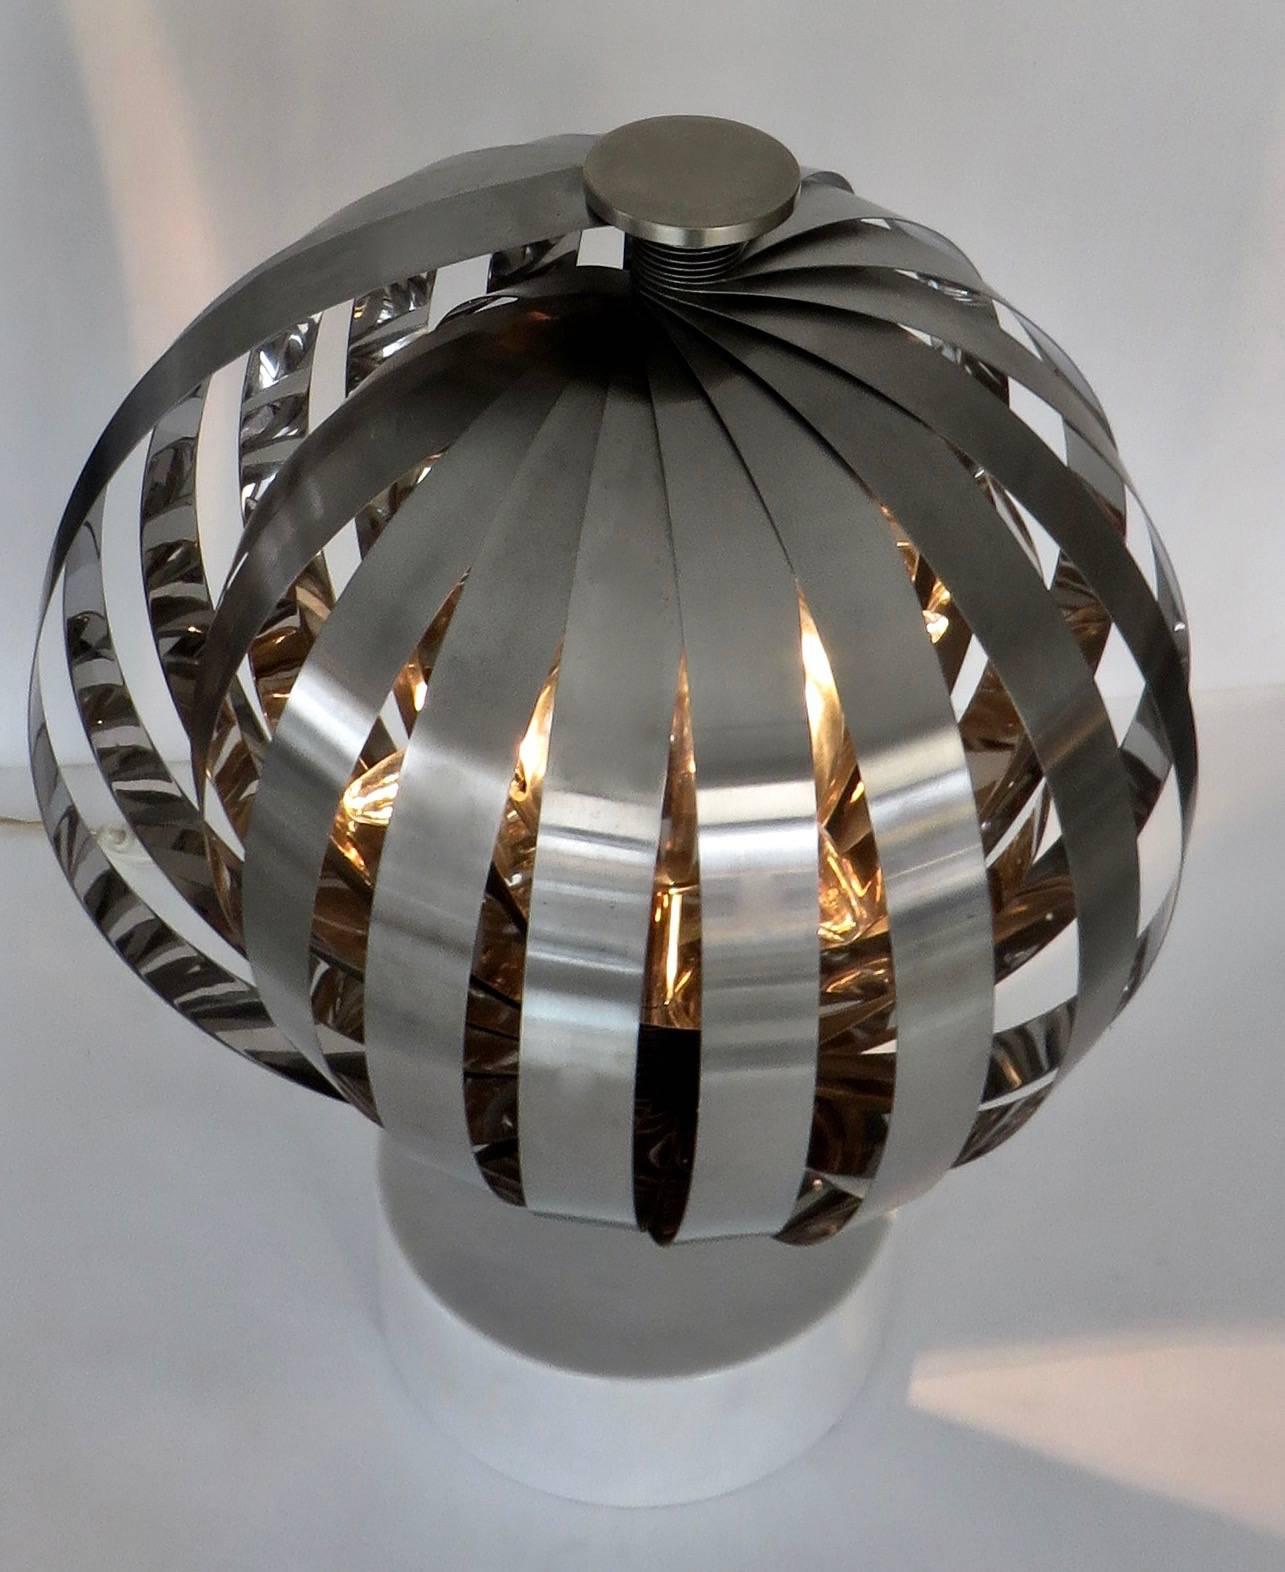 Stainless Steel Italian Table Lamp by Gaetano Missaglia, circa 1970 For Sale